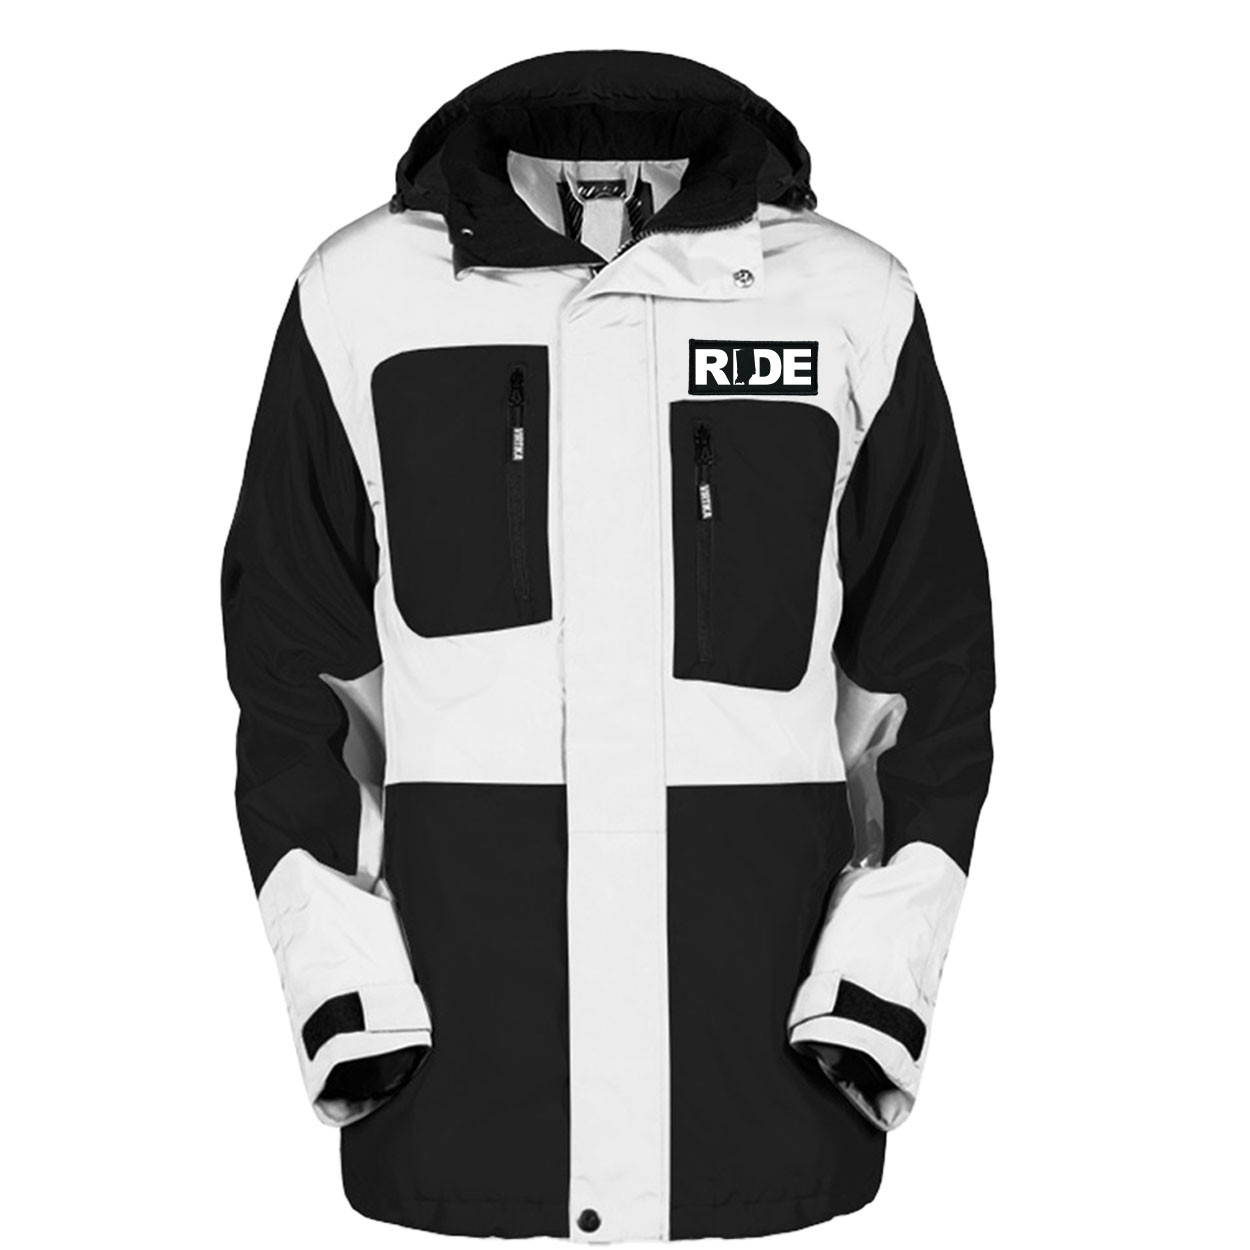 Ride Indiana Classic Woven Patch Pro Snowboard Jacket (Black/White)